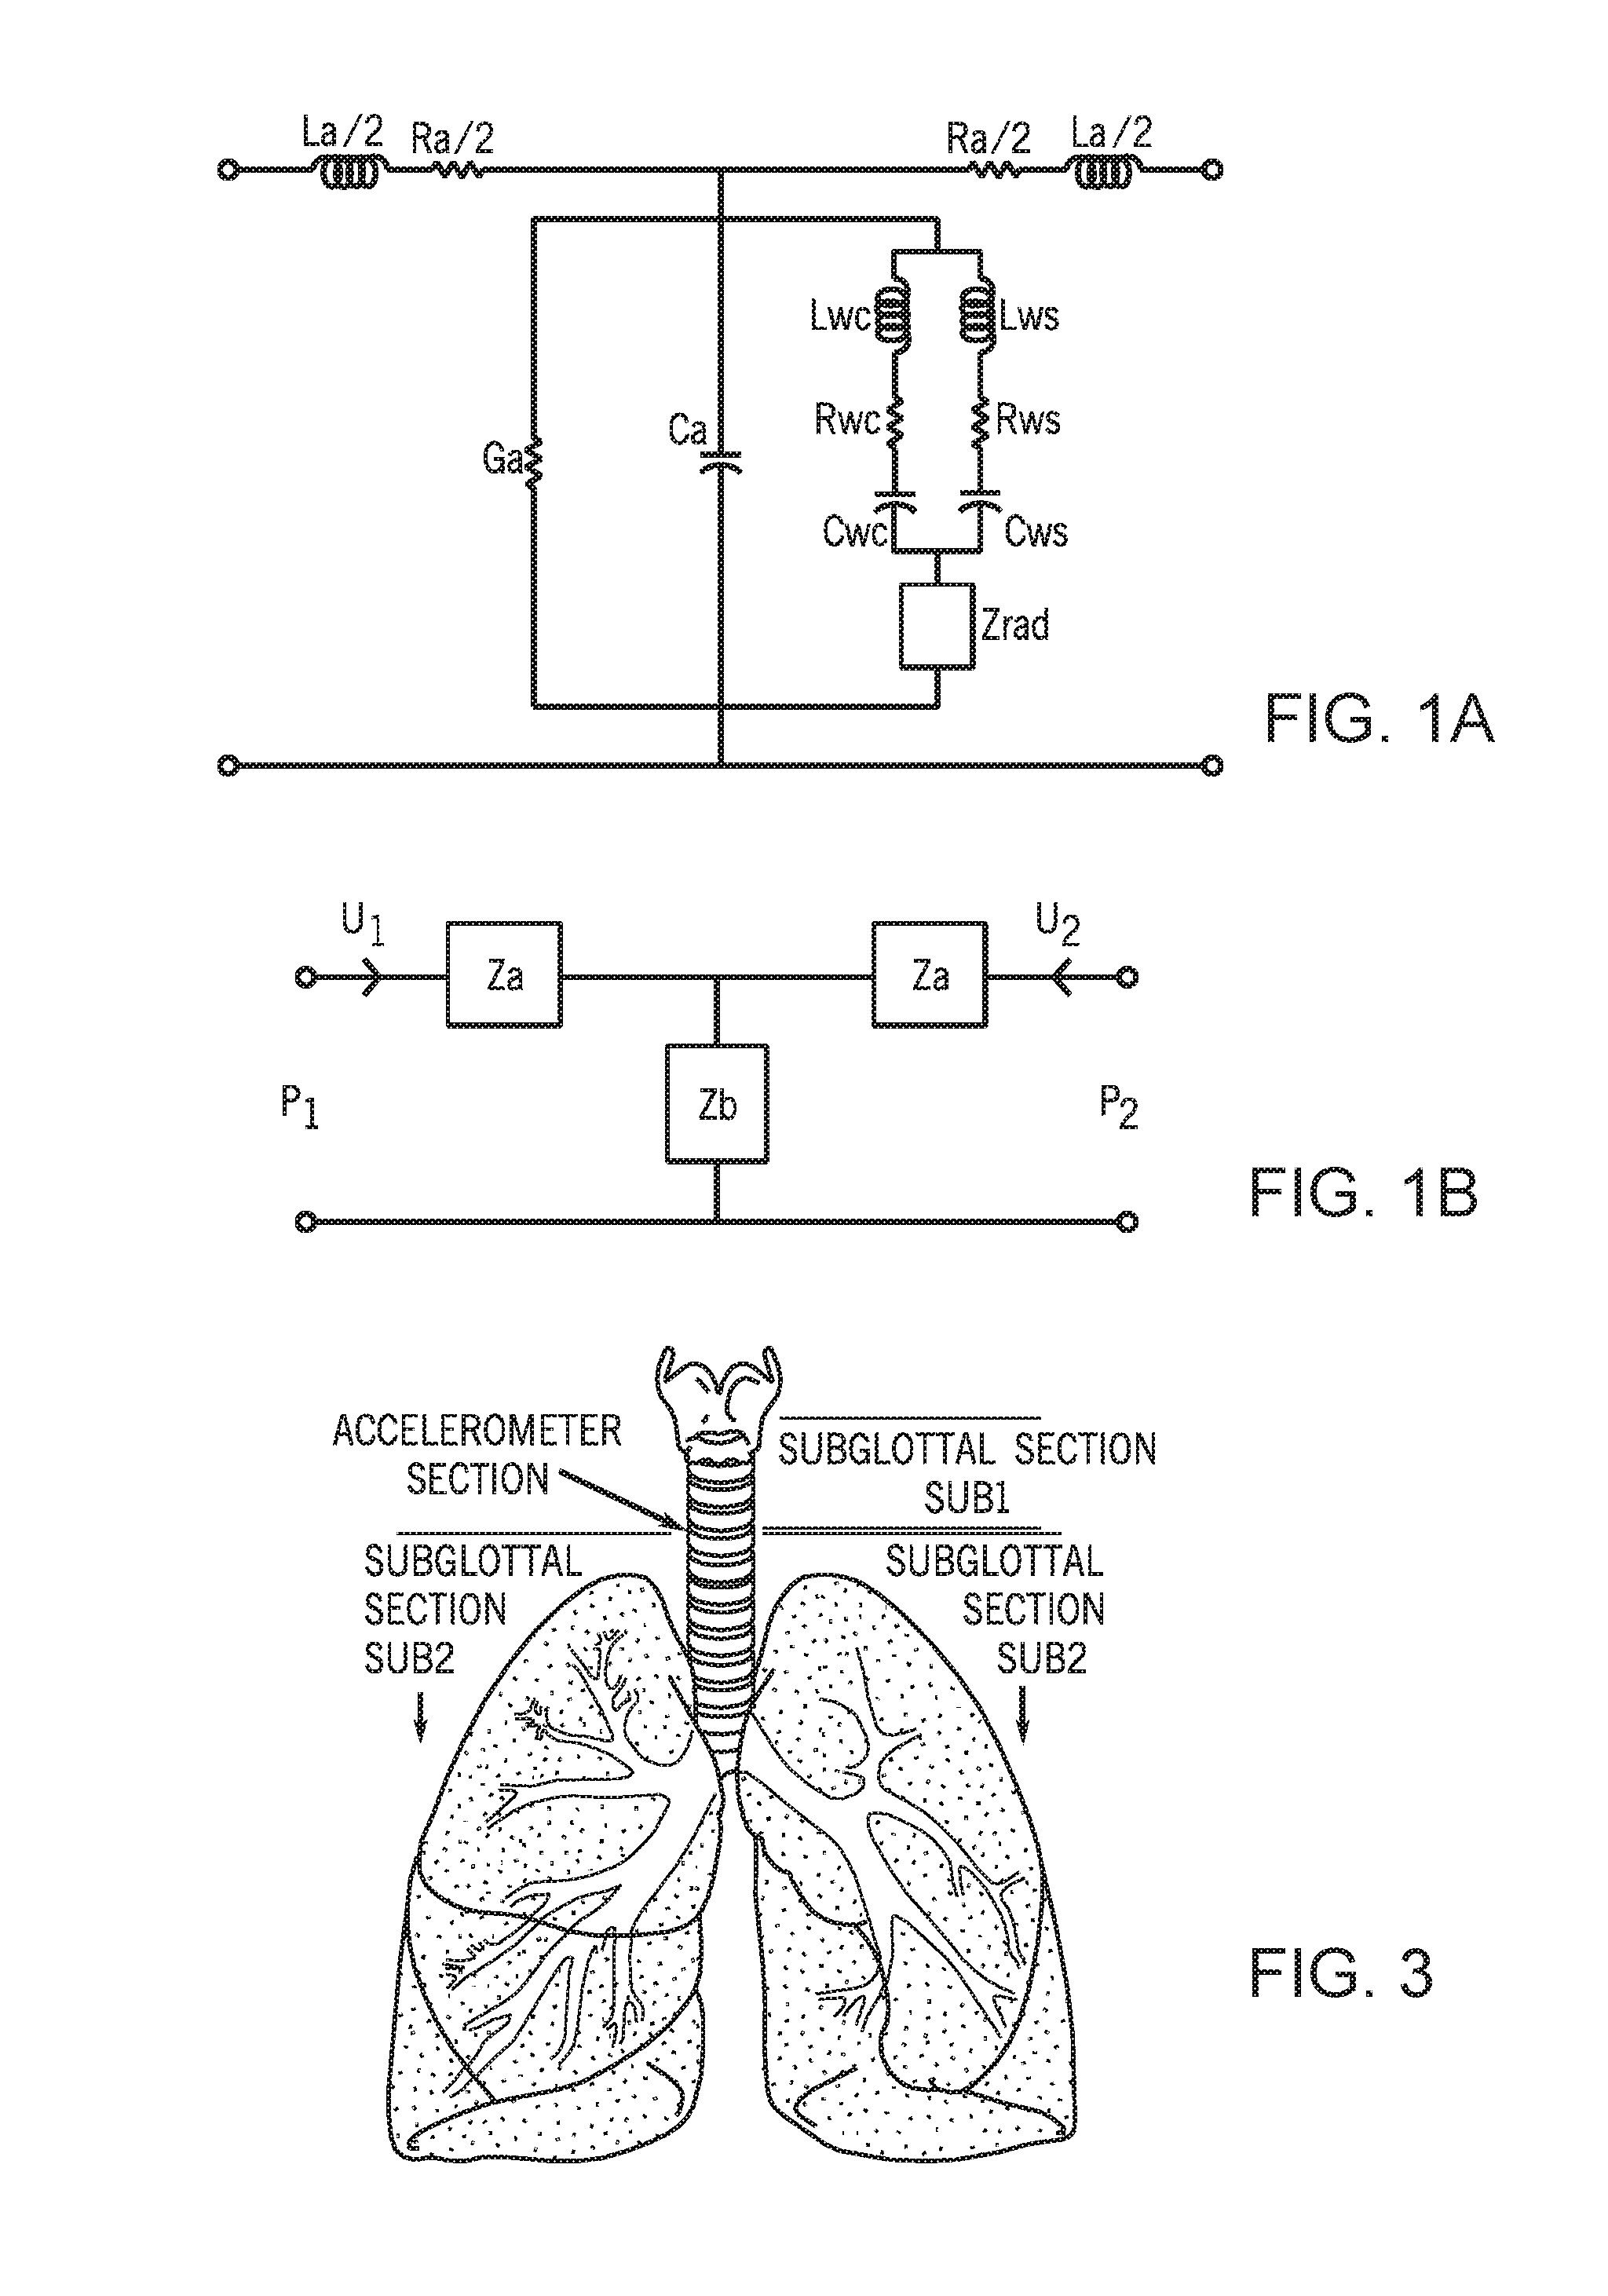 System and Method for Evaluating Vocal Function Using an Impedance-Based Inverse Filtering of Neck Surface Acceleration